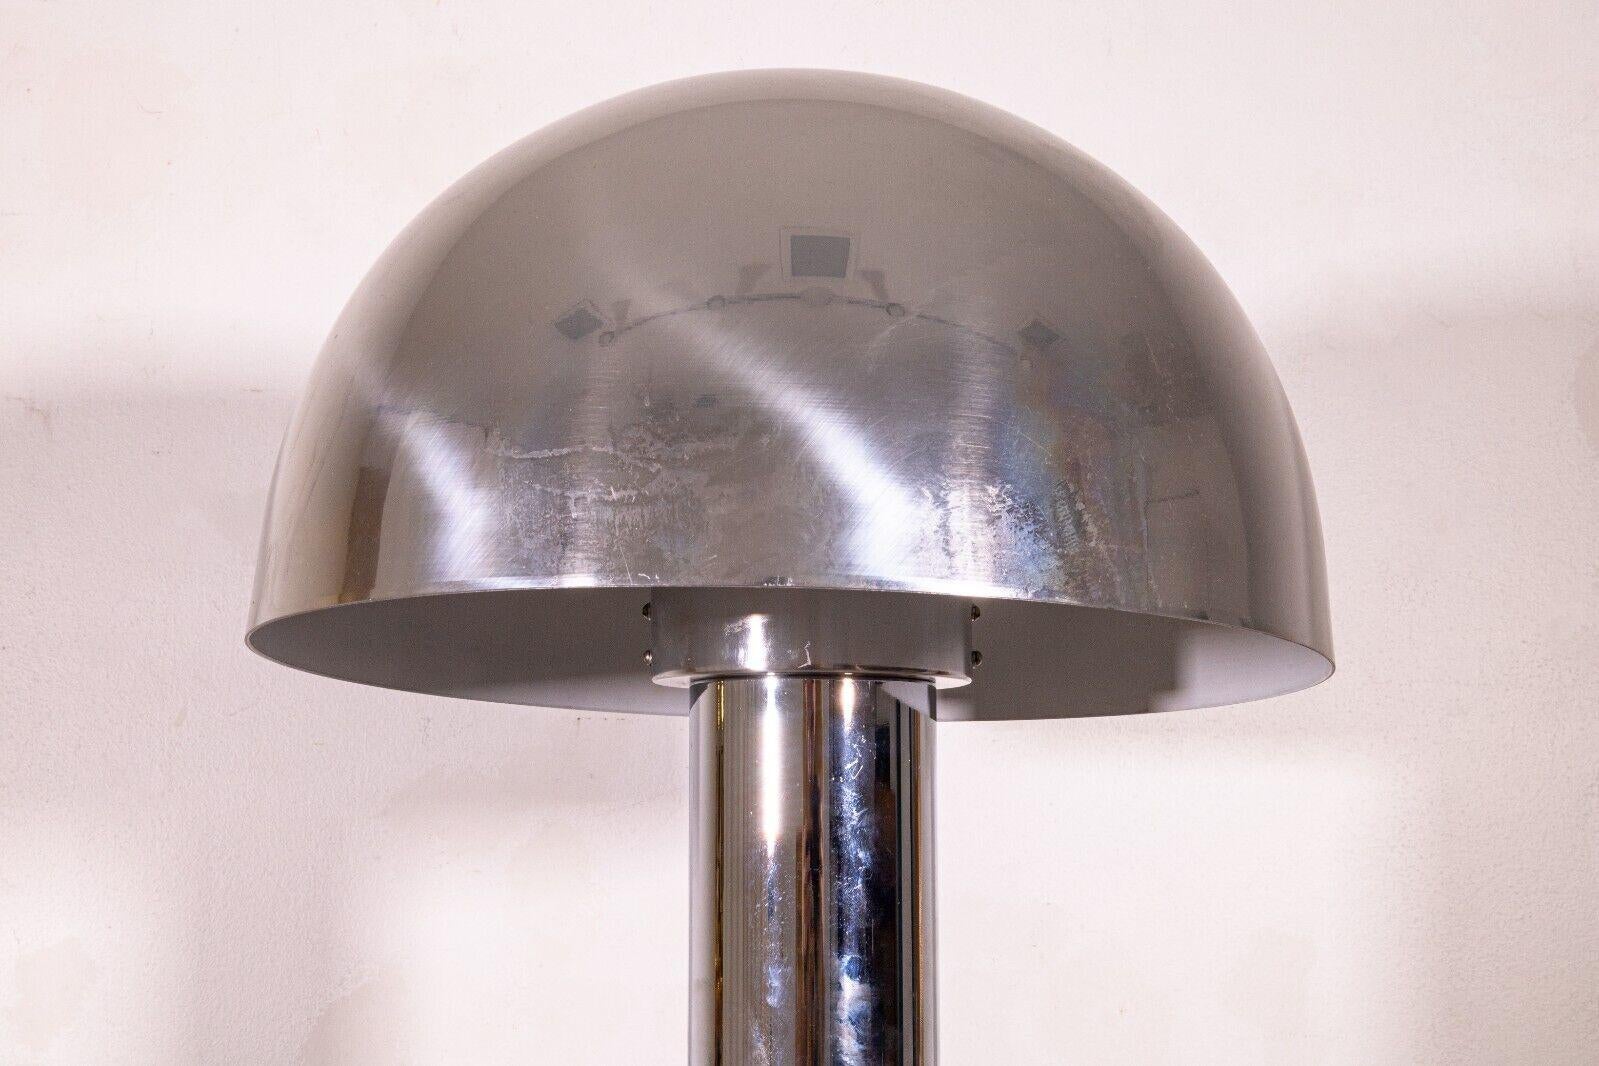 A contemporary modern Robert Sonneman for Laurel chrome mushroom floor lamp. A super cool retro modern floor lamp featuring a full chrome finish, a mushroom shade design, and a dimming light. This piece is corded electric. The top lamp shade can be